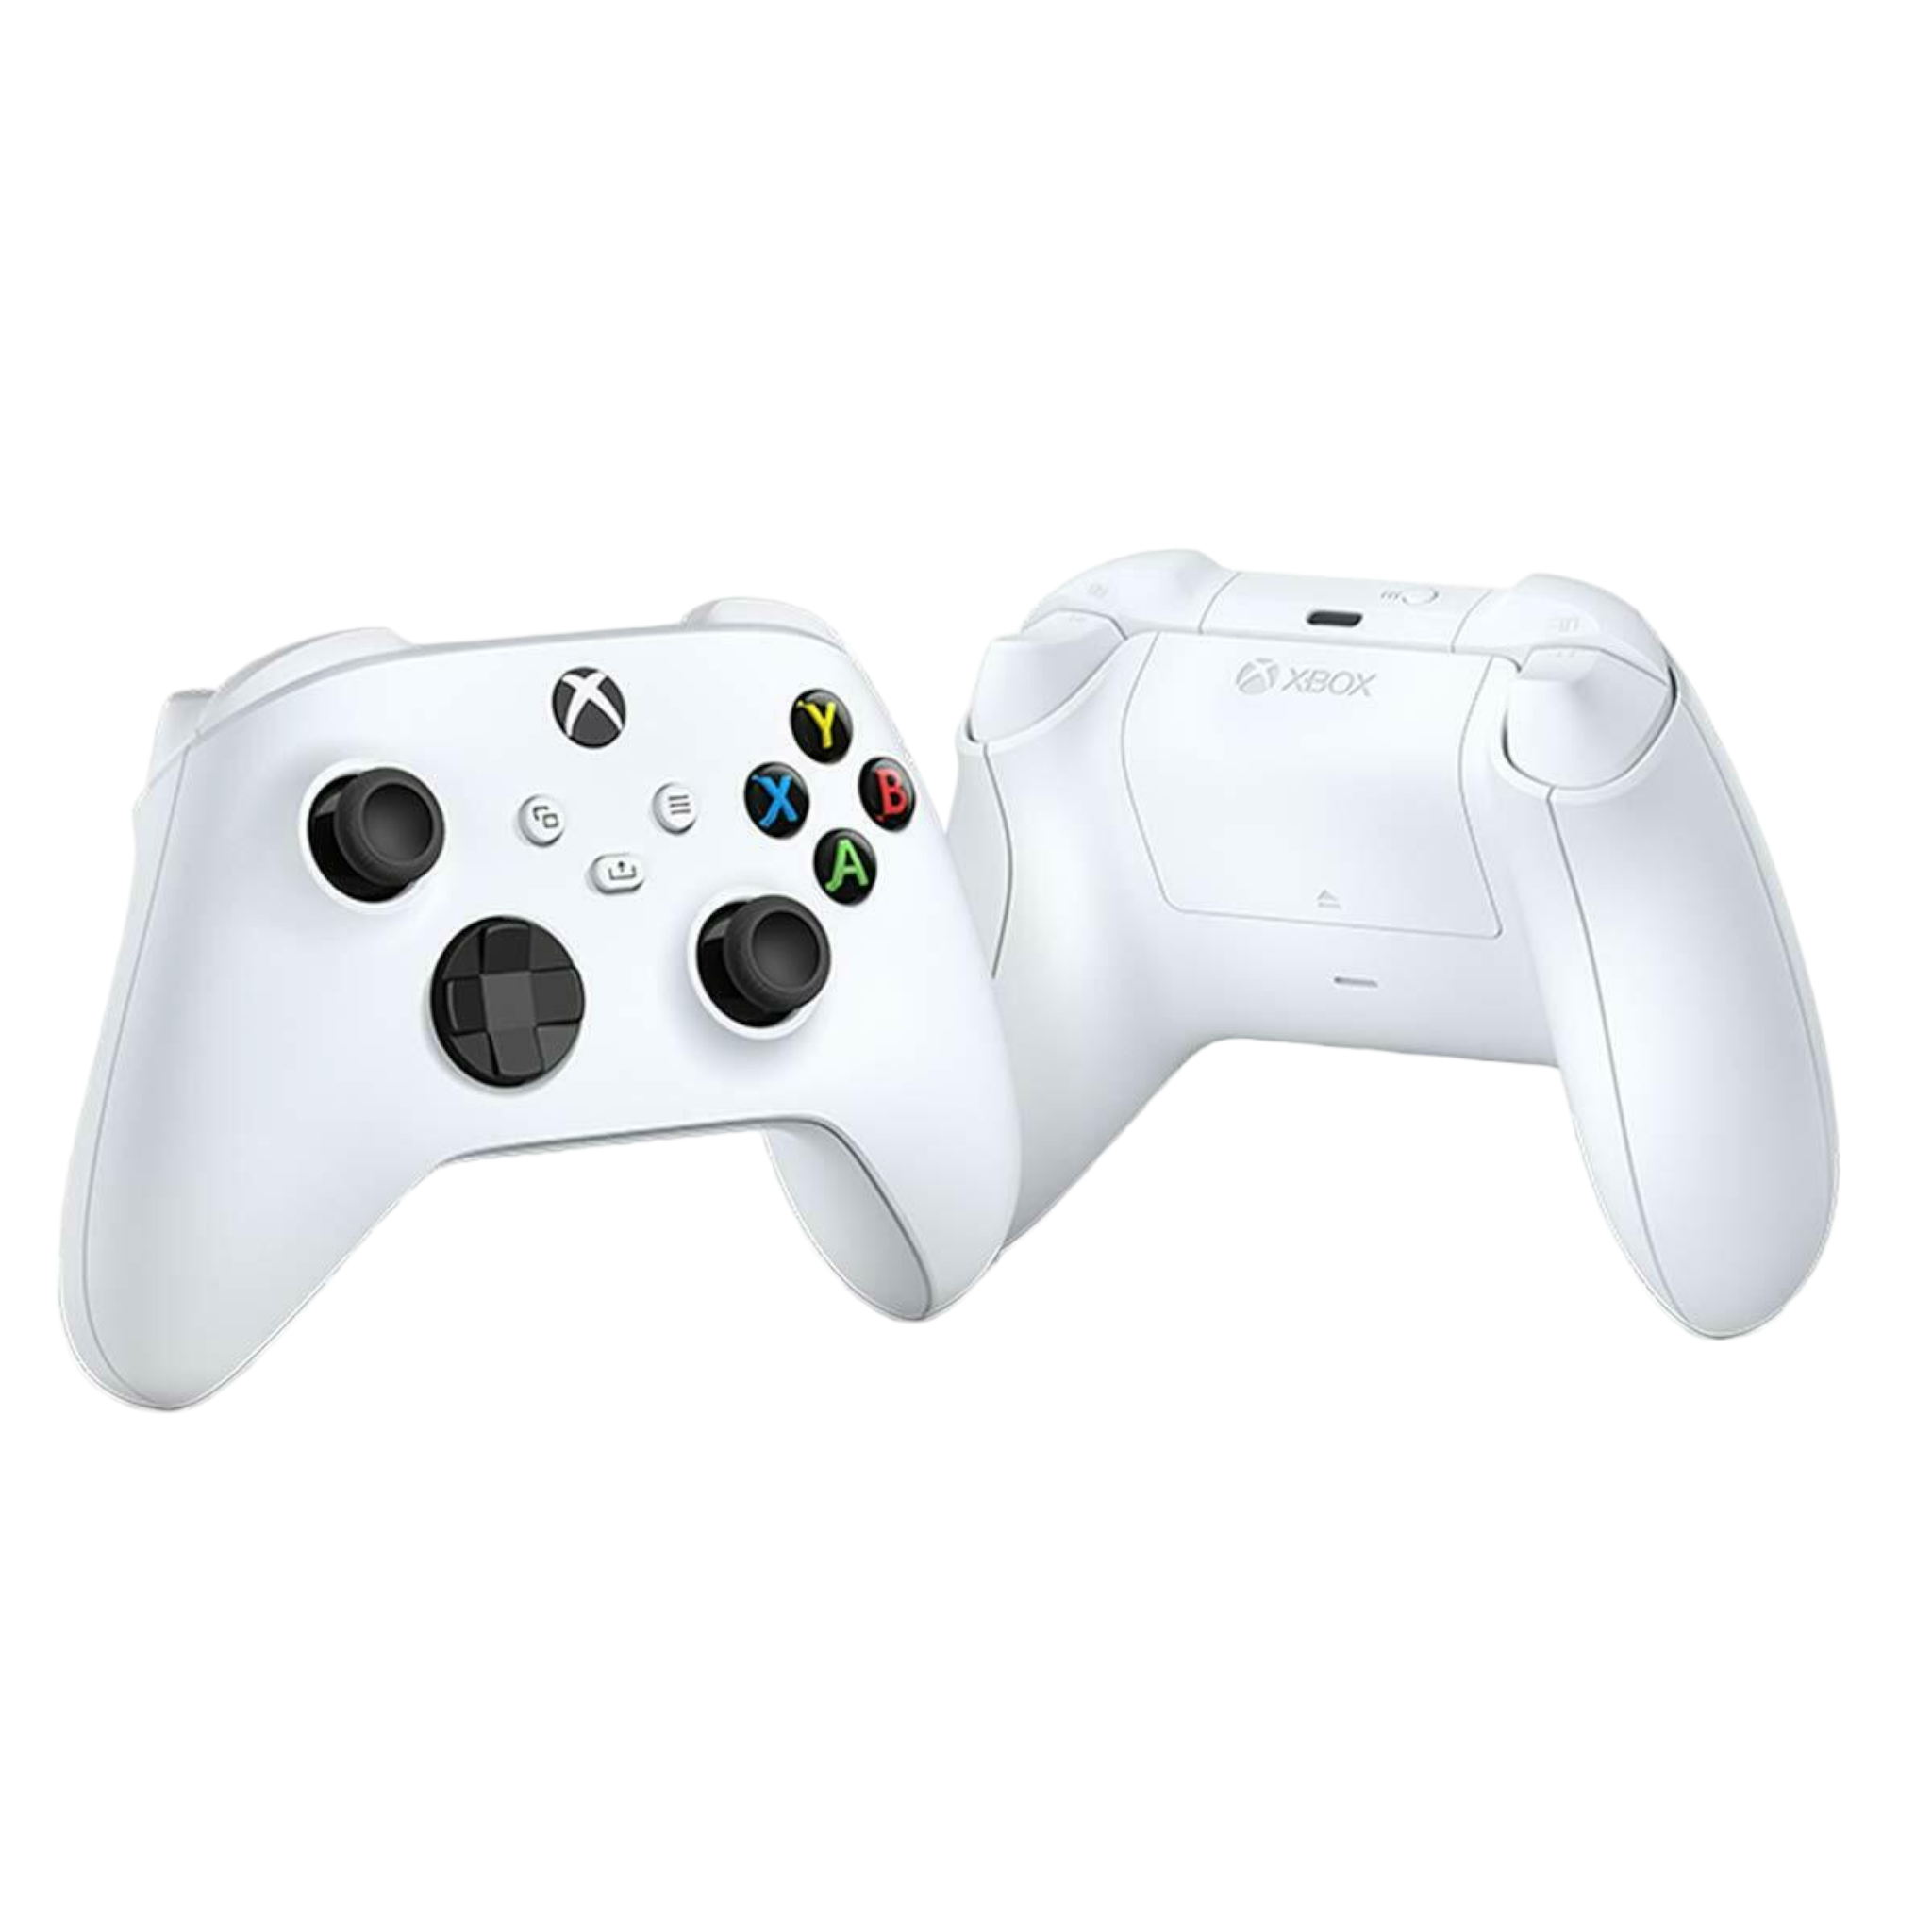 Microsoft Controller For Xbox Series X, Xbox Series S, And Xbox One (Latest Model) - Robot White QAS-00001 - Pro-Distributing